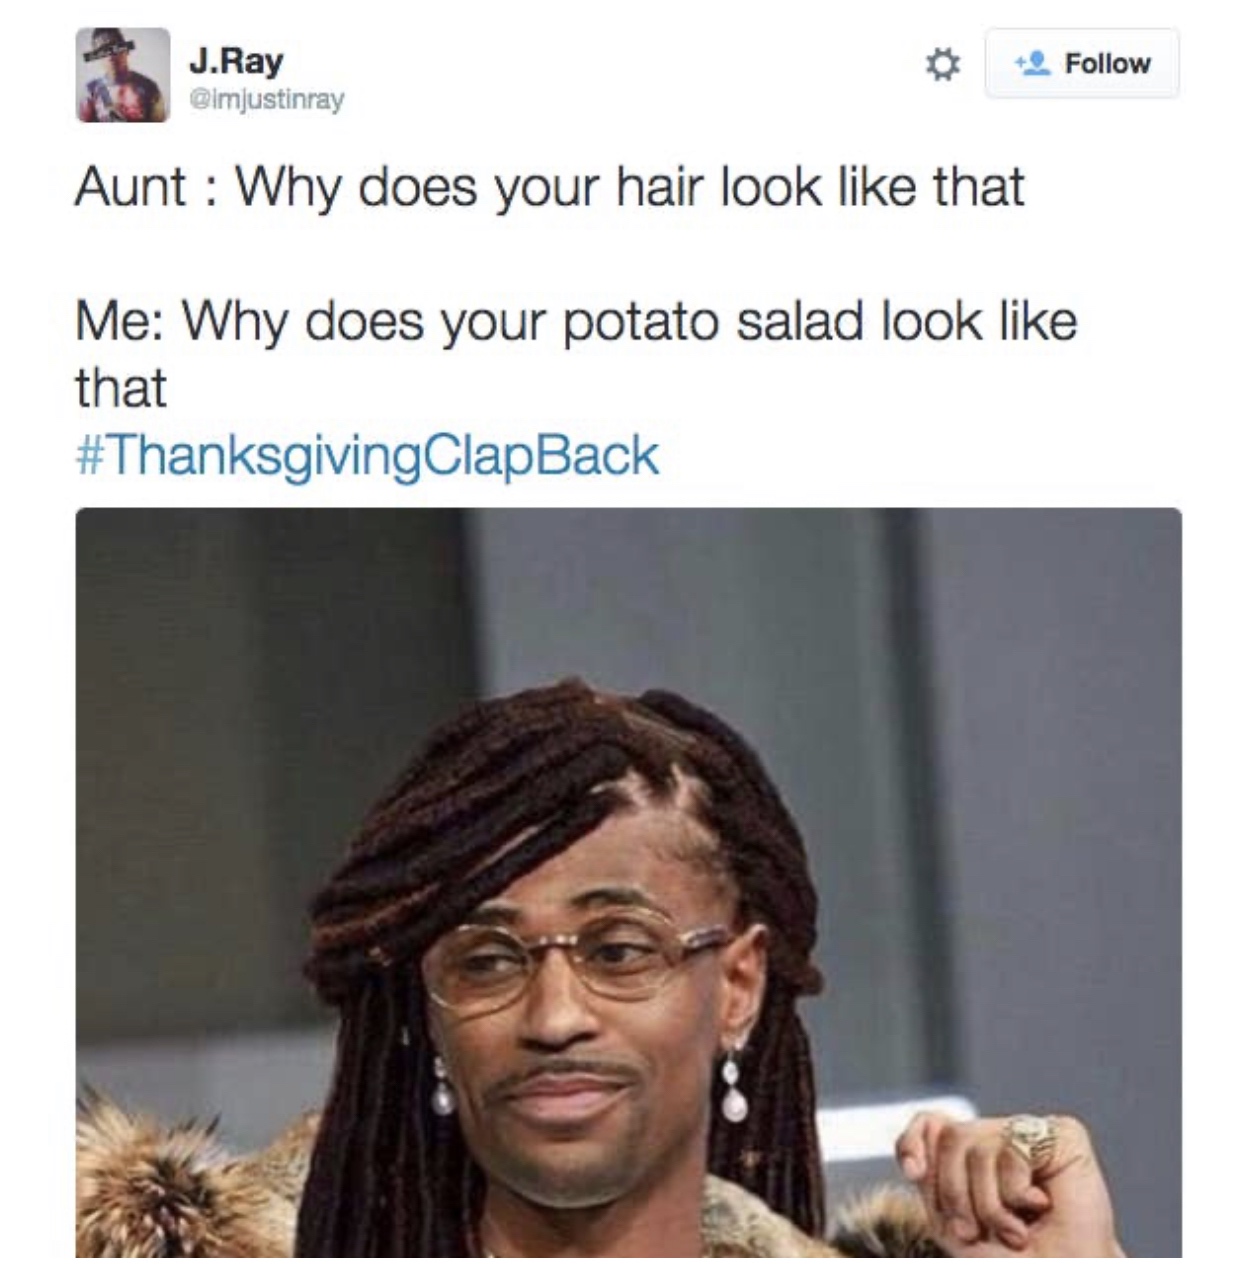 thanksgiving clapback memes - J.Ray Aunt Why does your hair look that Me Why does your potato salad look that ClapBack